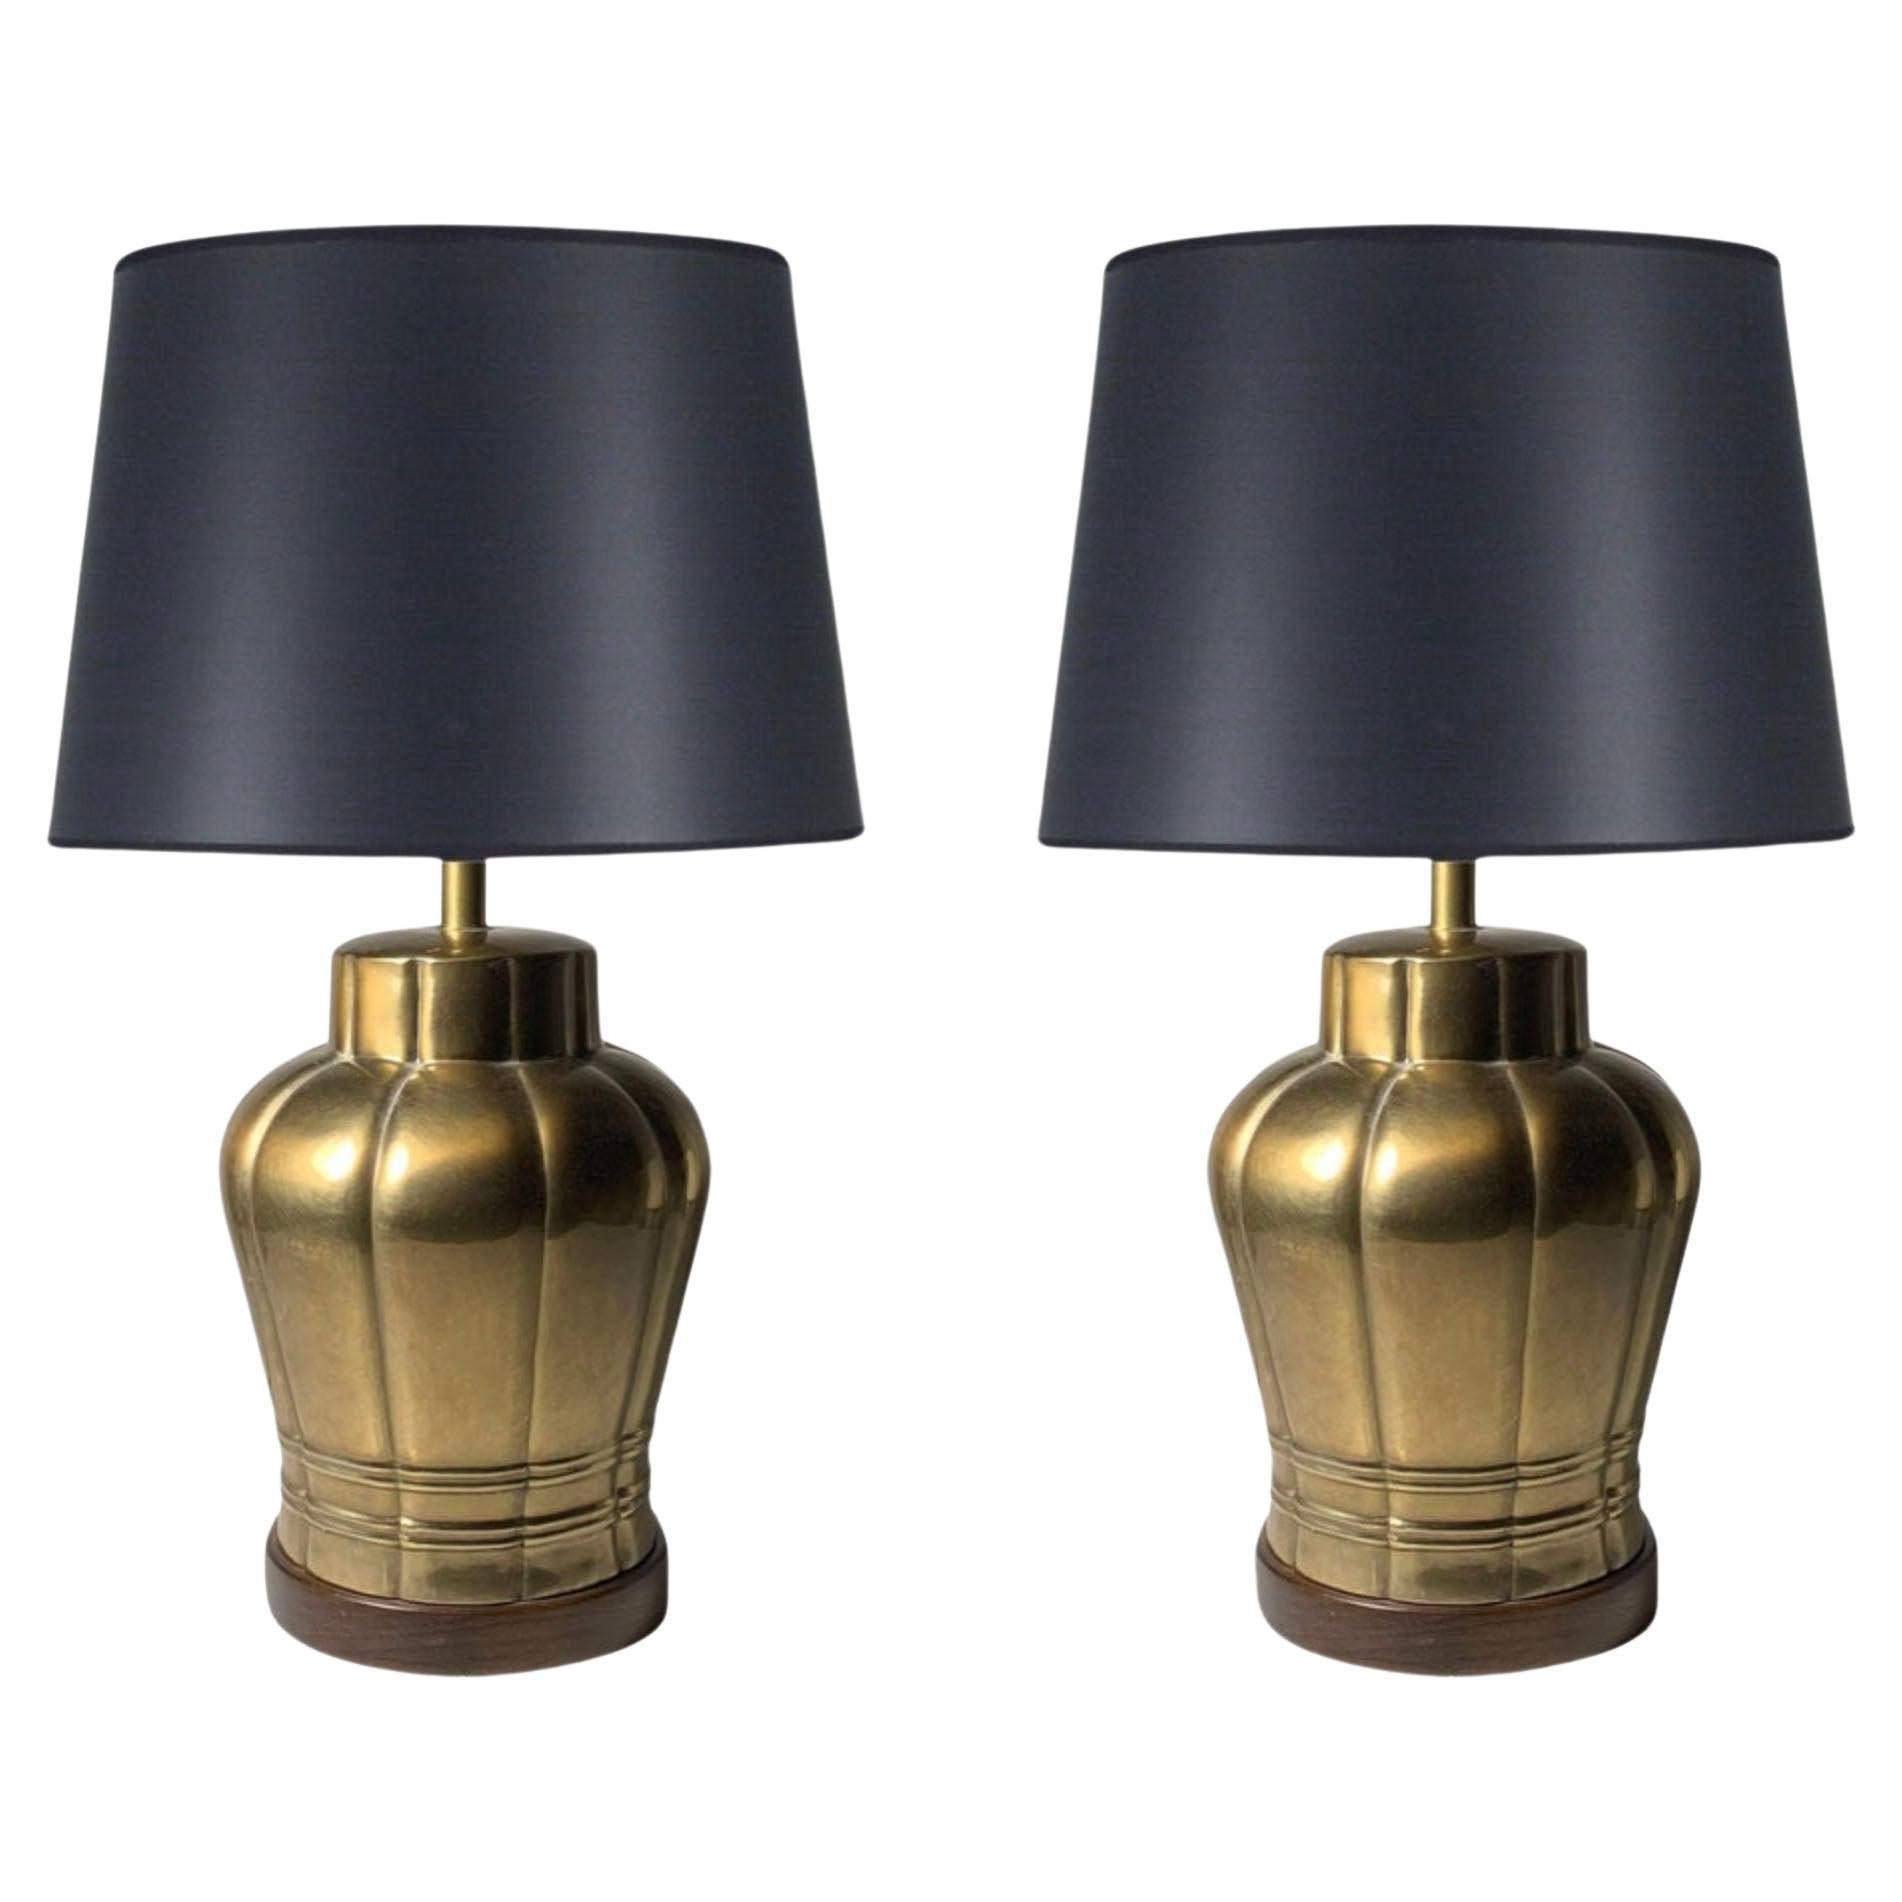 Pair of Vintage Brass Table Lamps by Frederick Cooper